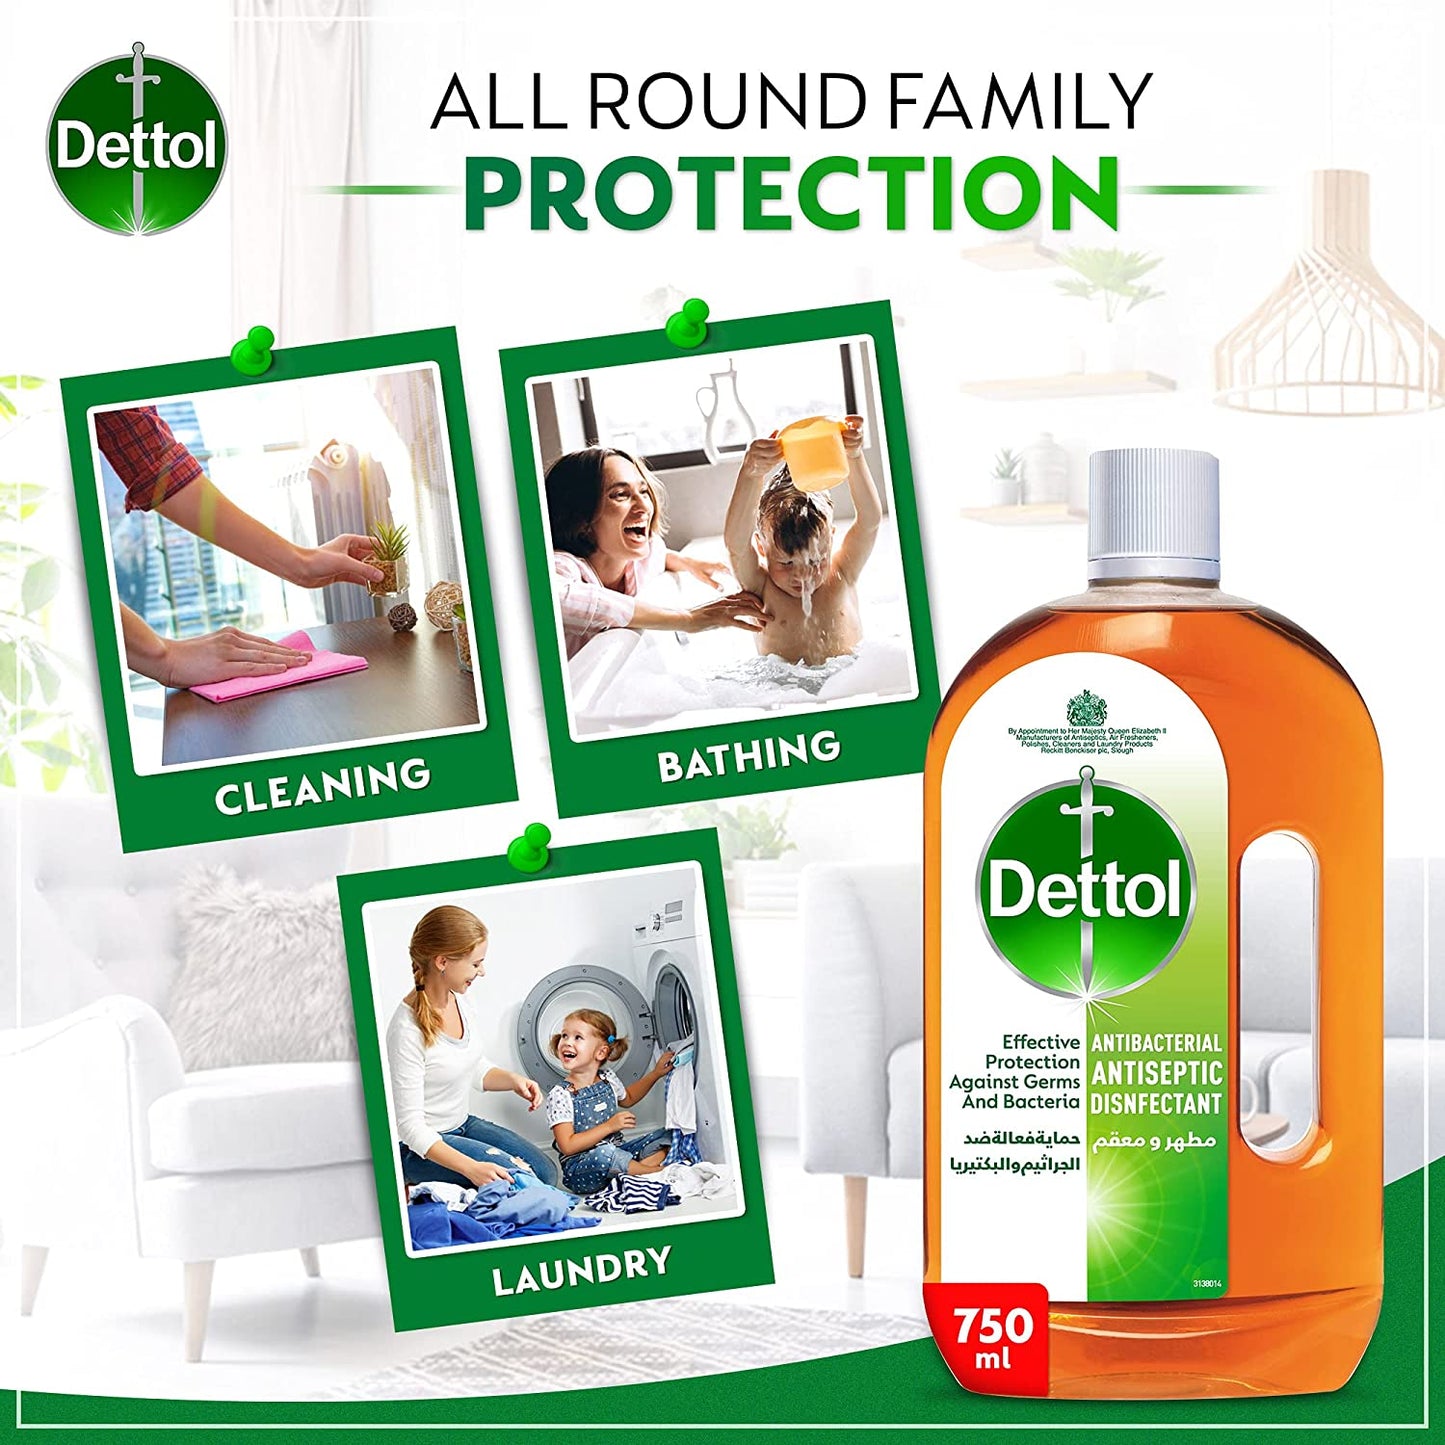 dettol-anticeptic-750mlDettol Antiseptic Antibacterial Disinfectant Liquid for Effective Germ Protection and Personal Hygiene, Used in Floor Cleaning, Bathing and Laundry, 750ml